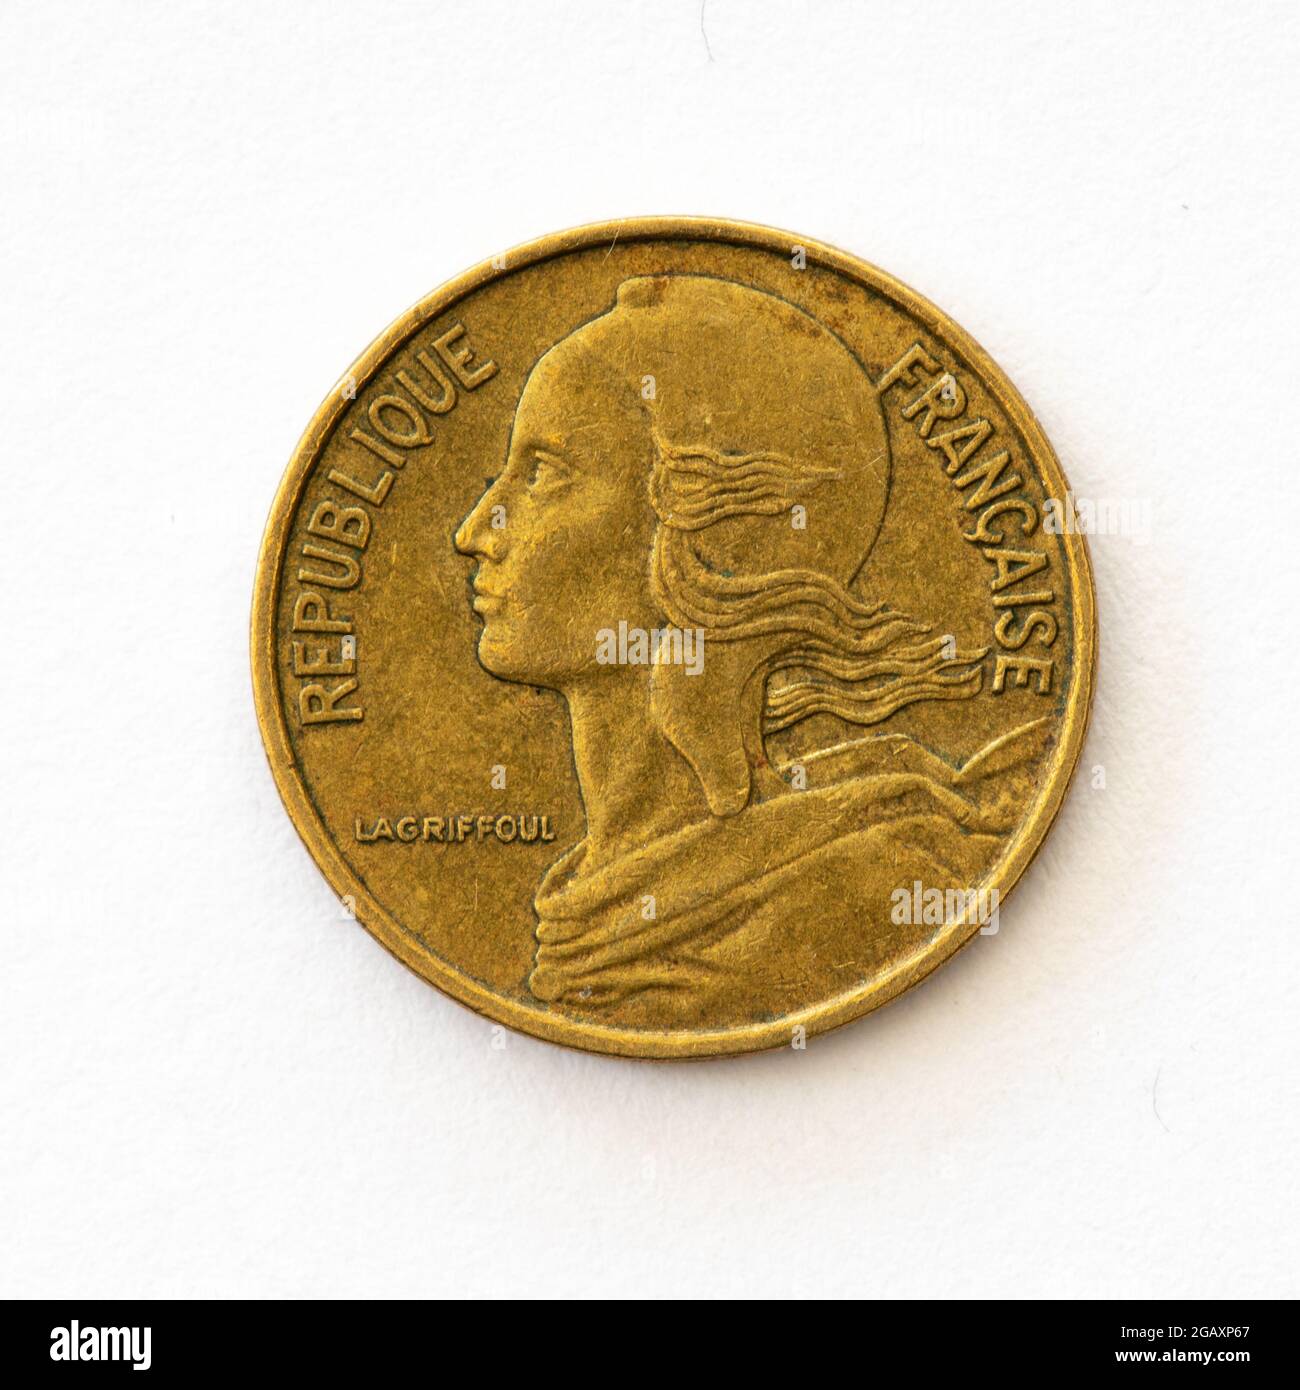 French 5 centime coin - 1971 - Obverse designed by Henri Lagriffoul featuring Marianne - showing the four-fold variant of the neck scarf Stock Photo